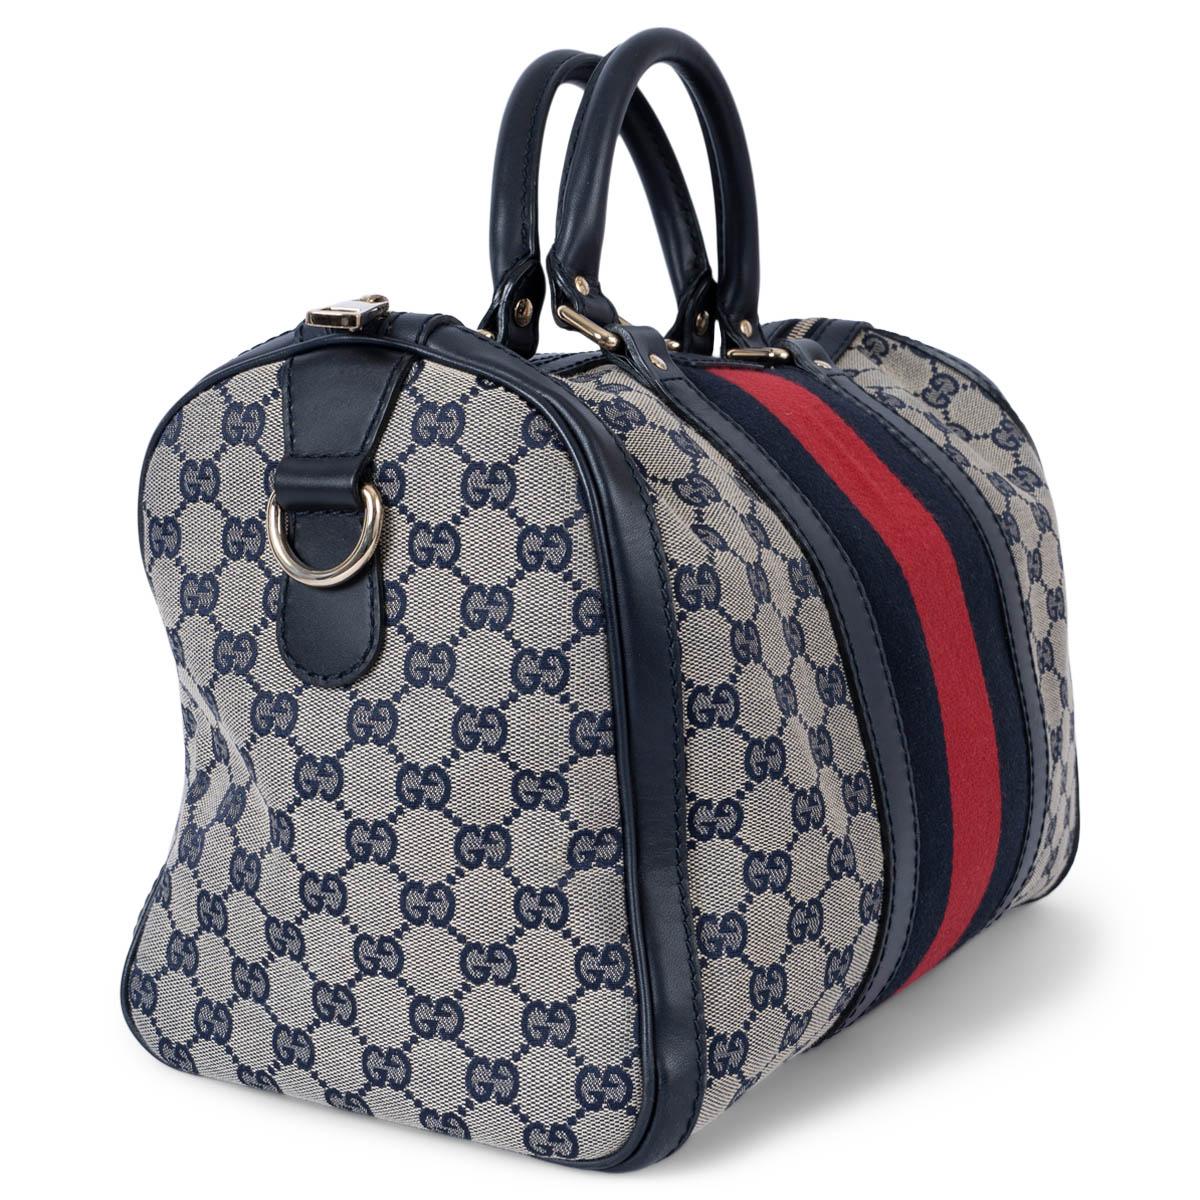 100% authentic Gucci Vinatge Boston bag in navy blue and ivory GG canvas with blue leather trim and classic red & blue Web stripe in the middle. The design features light gold-toned hardware and opens with a zipper on top. Lined in ivory canvas